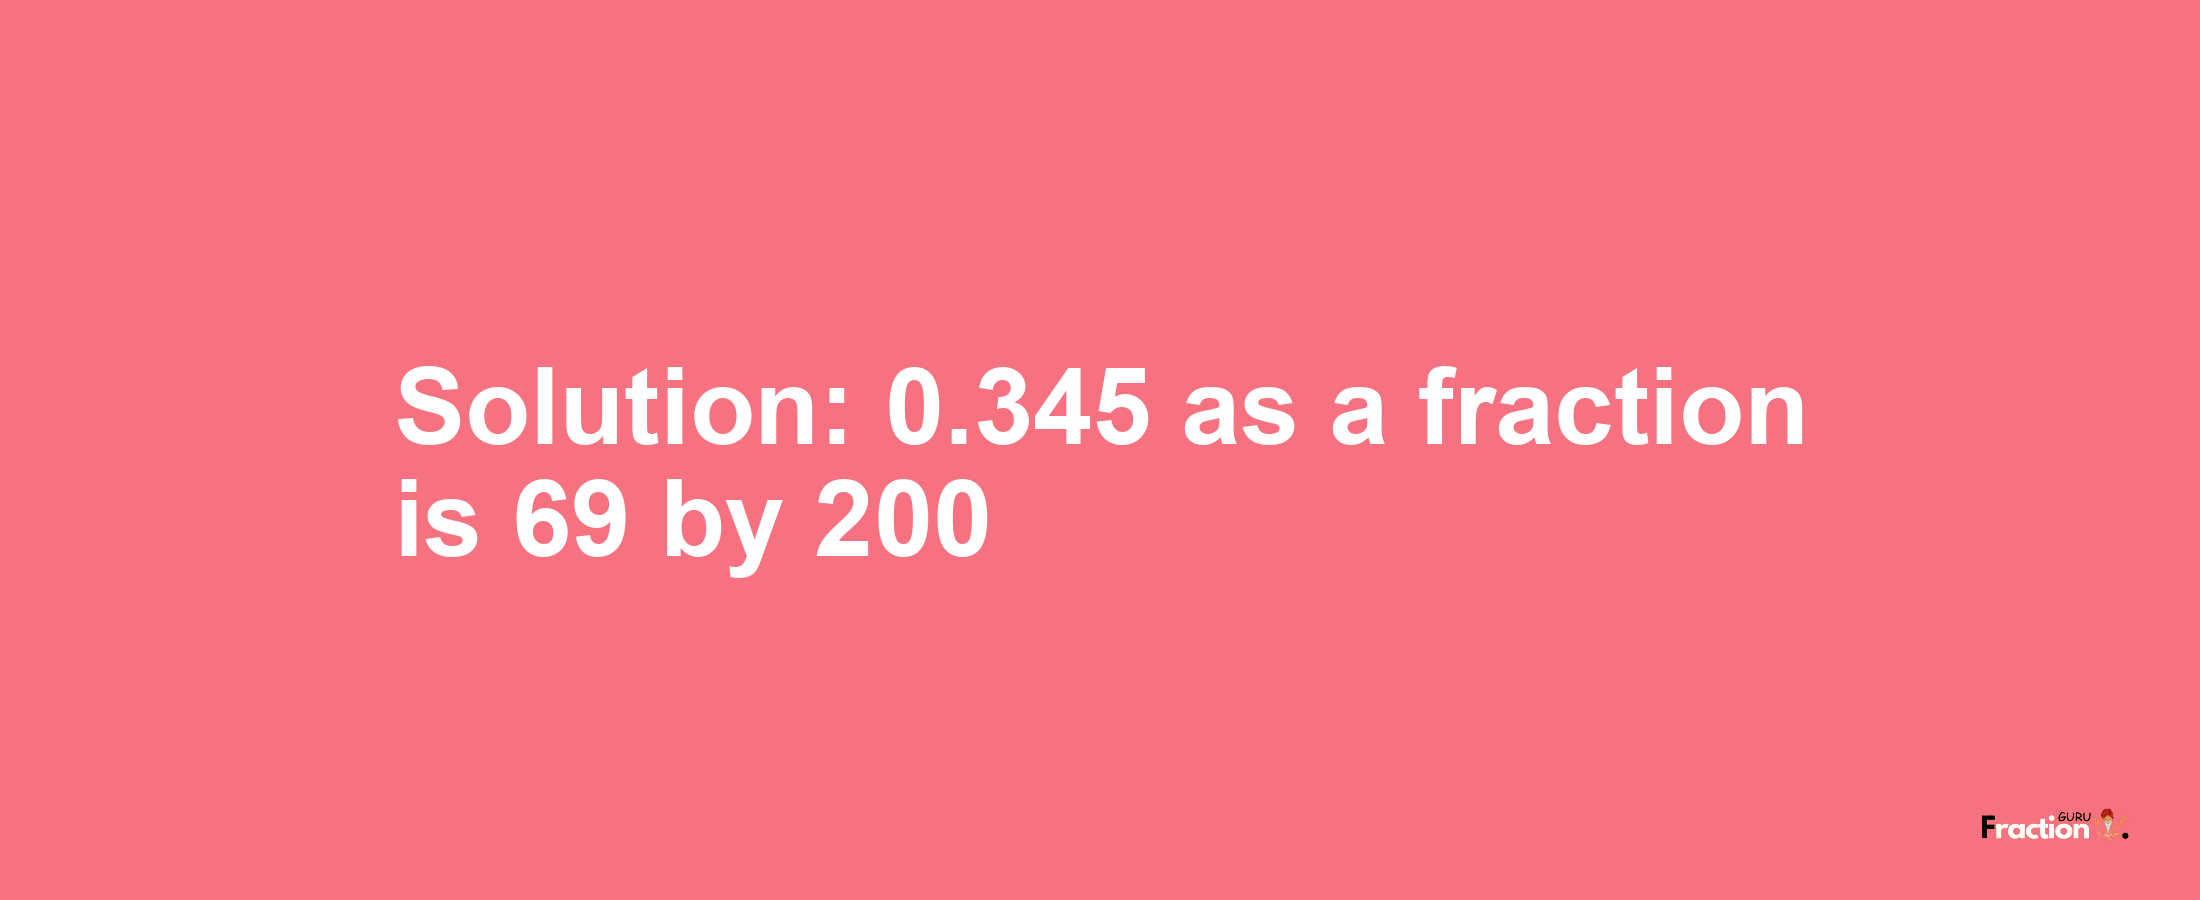 Solution:0.345 as a fraction is 69/200